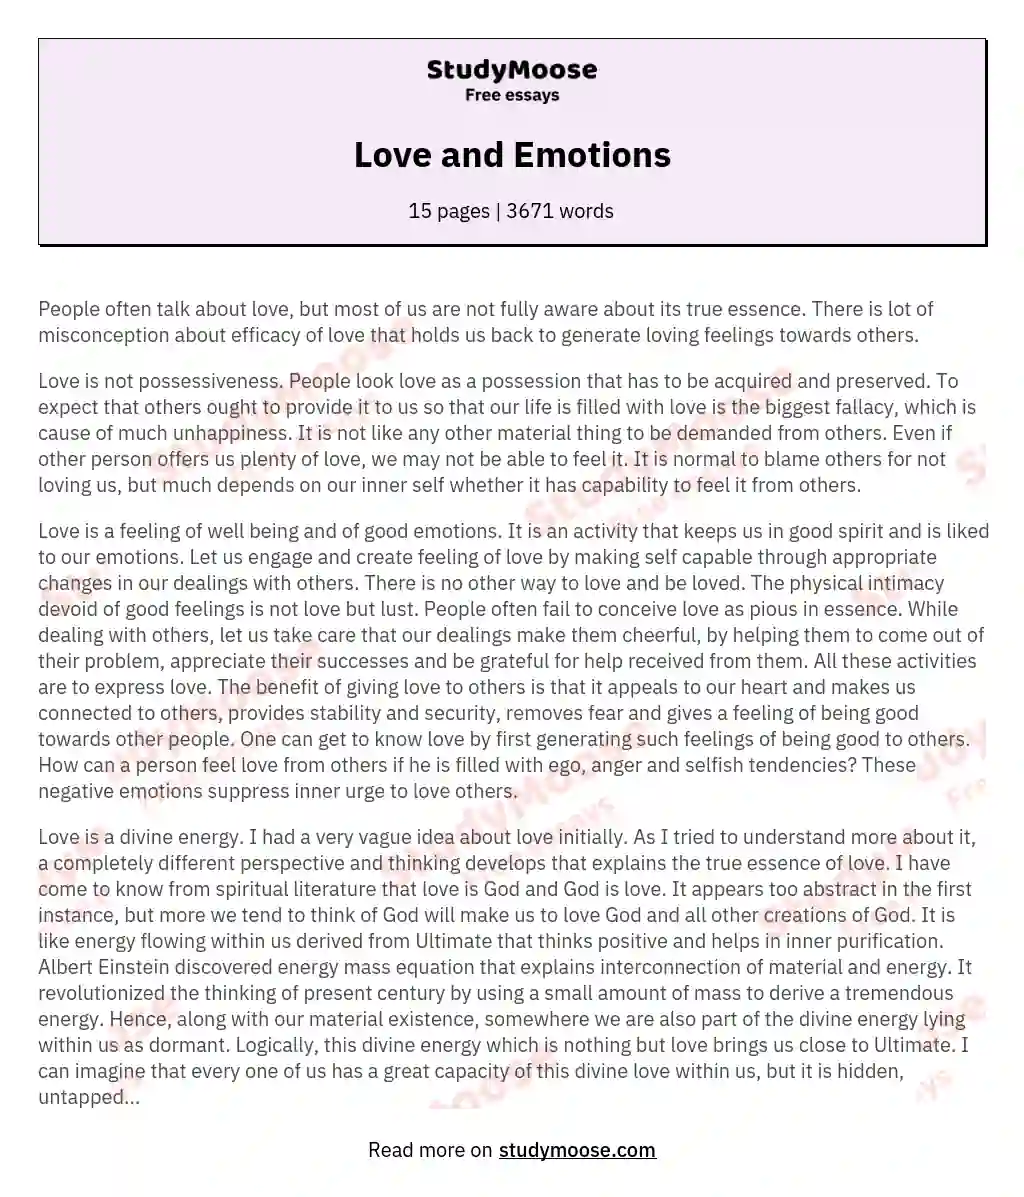 Love and Emotions